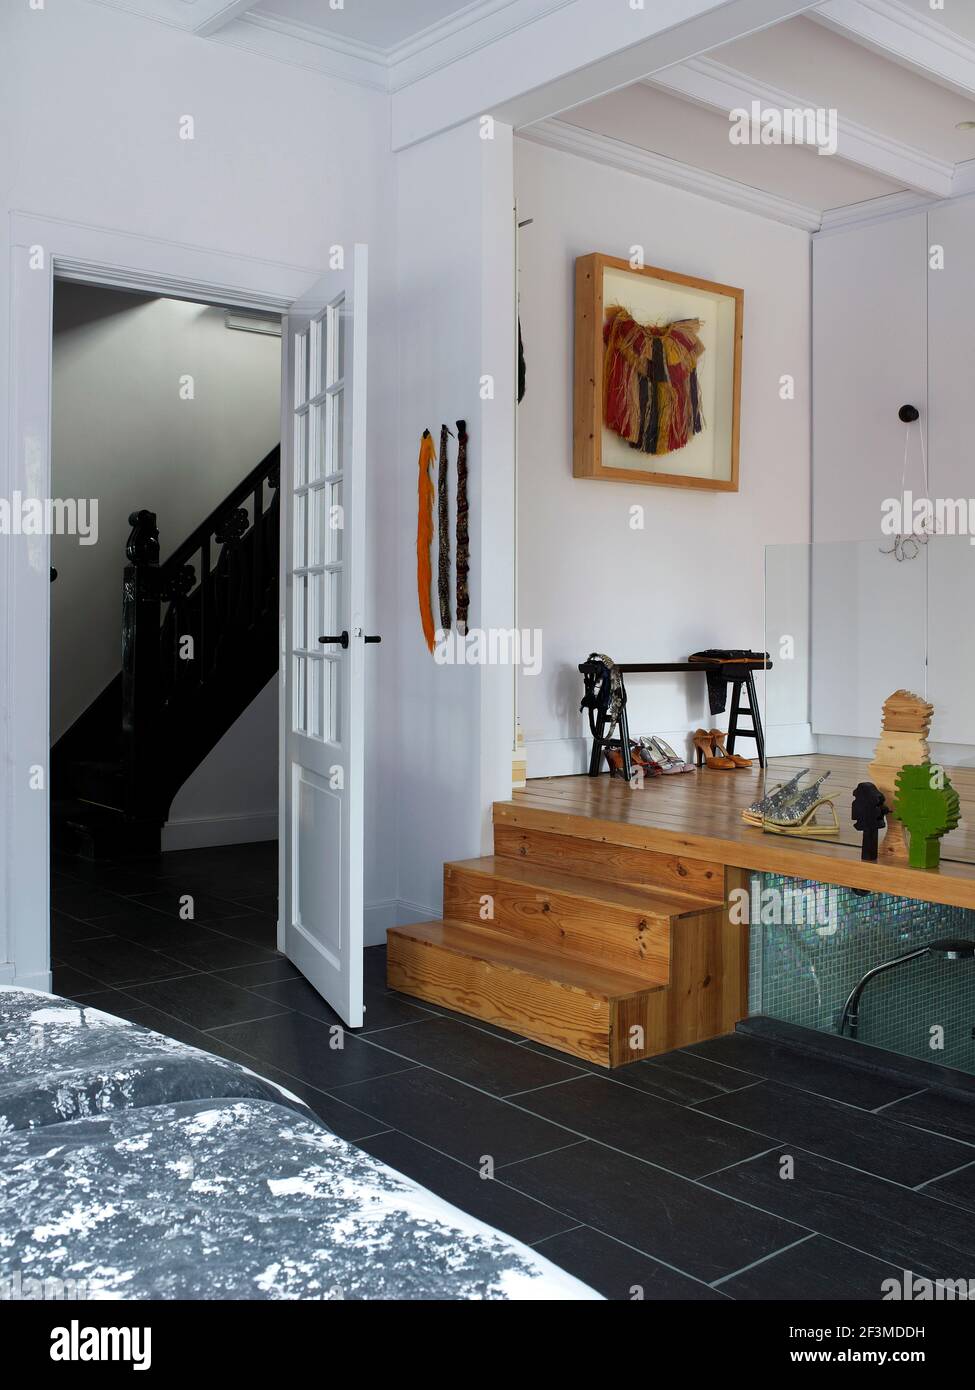 Split level small space living area with transparent panel with view to bathroom and doorway with view through to staircase with artwork in residentia Stock Photo